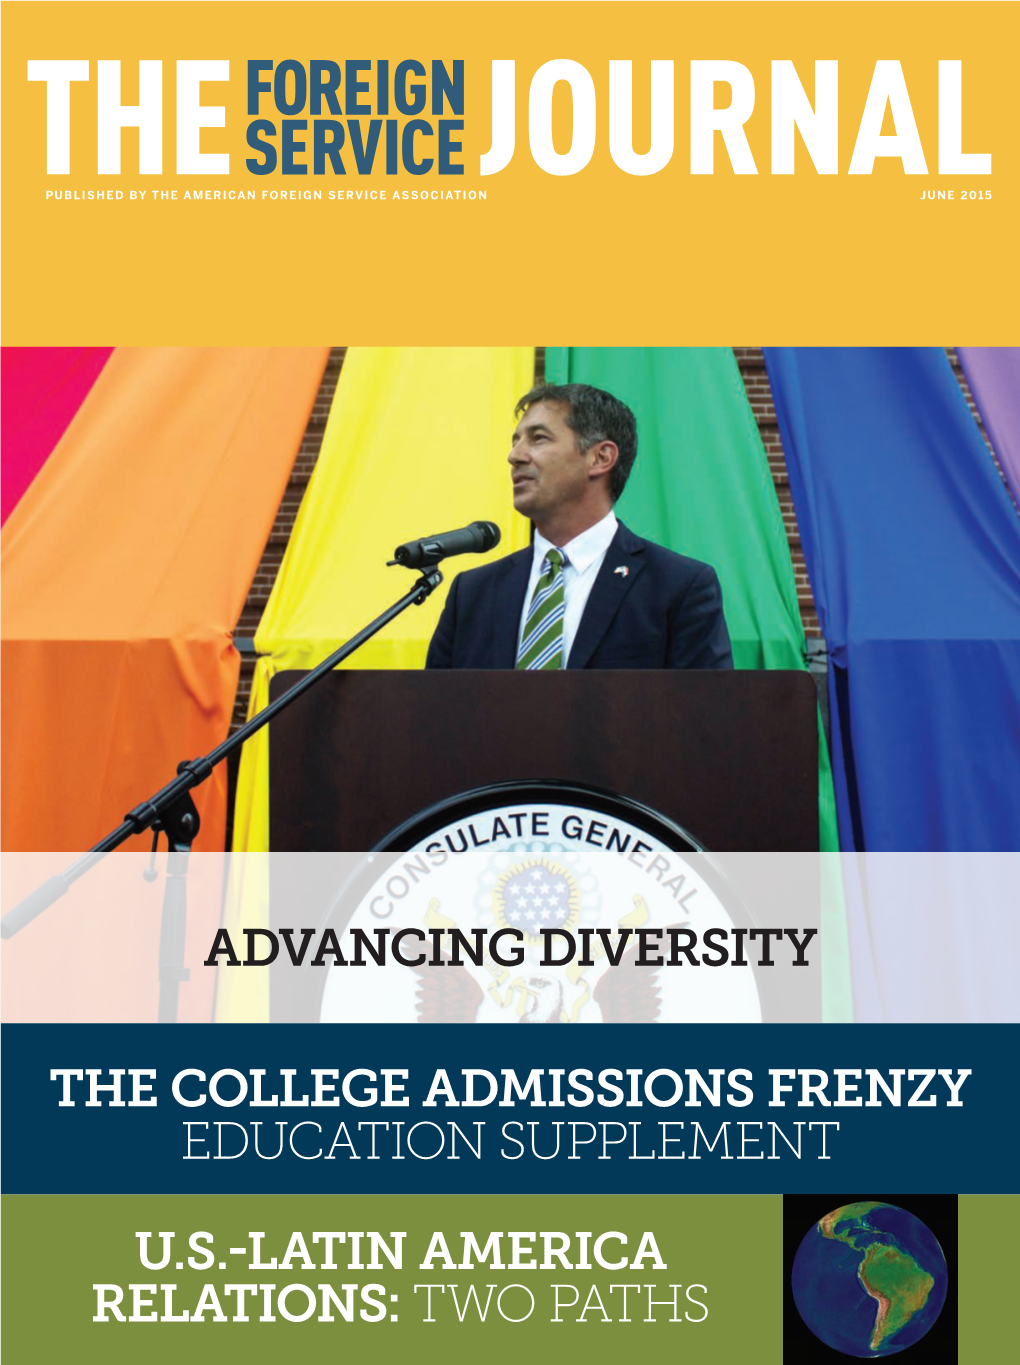 The Foreign Service Journal, June 2015